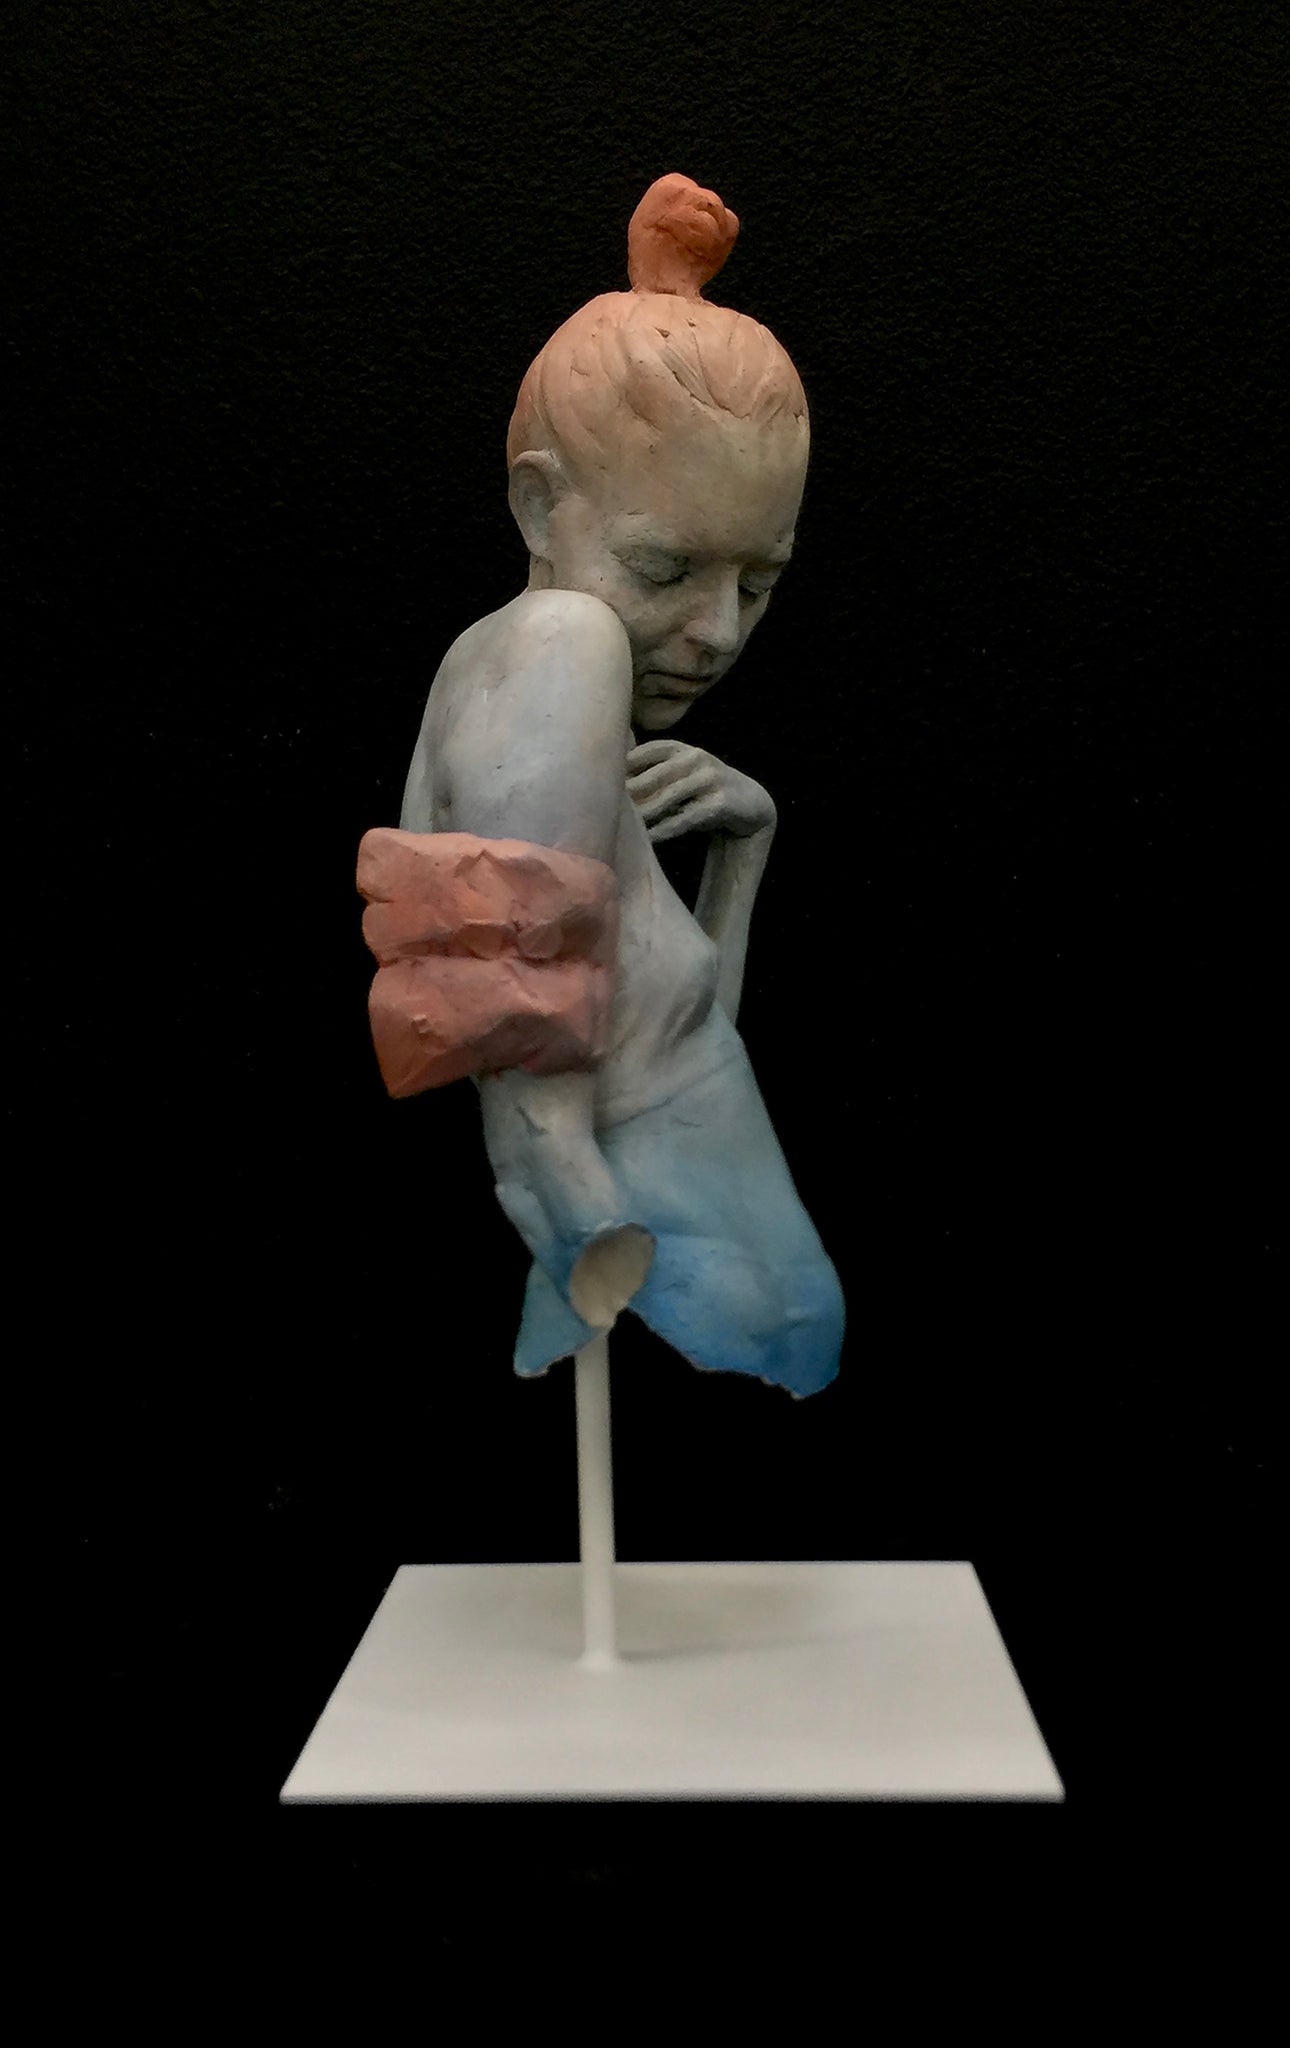 Brittany Ryan, "Mounted Fragment of 'Little Swimmer'"